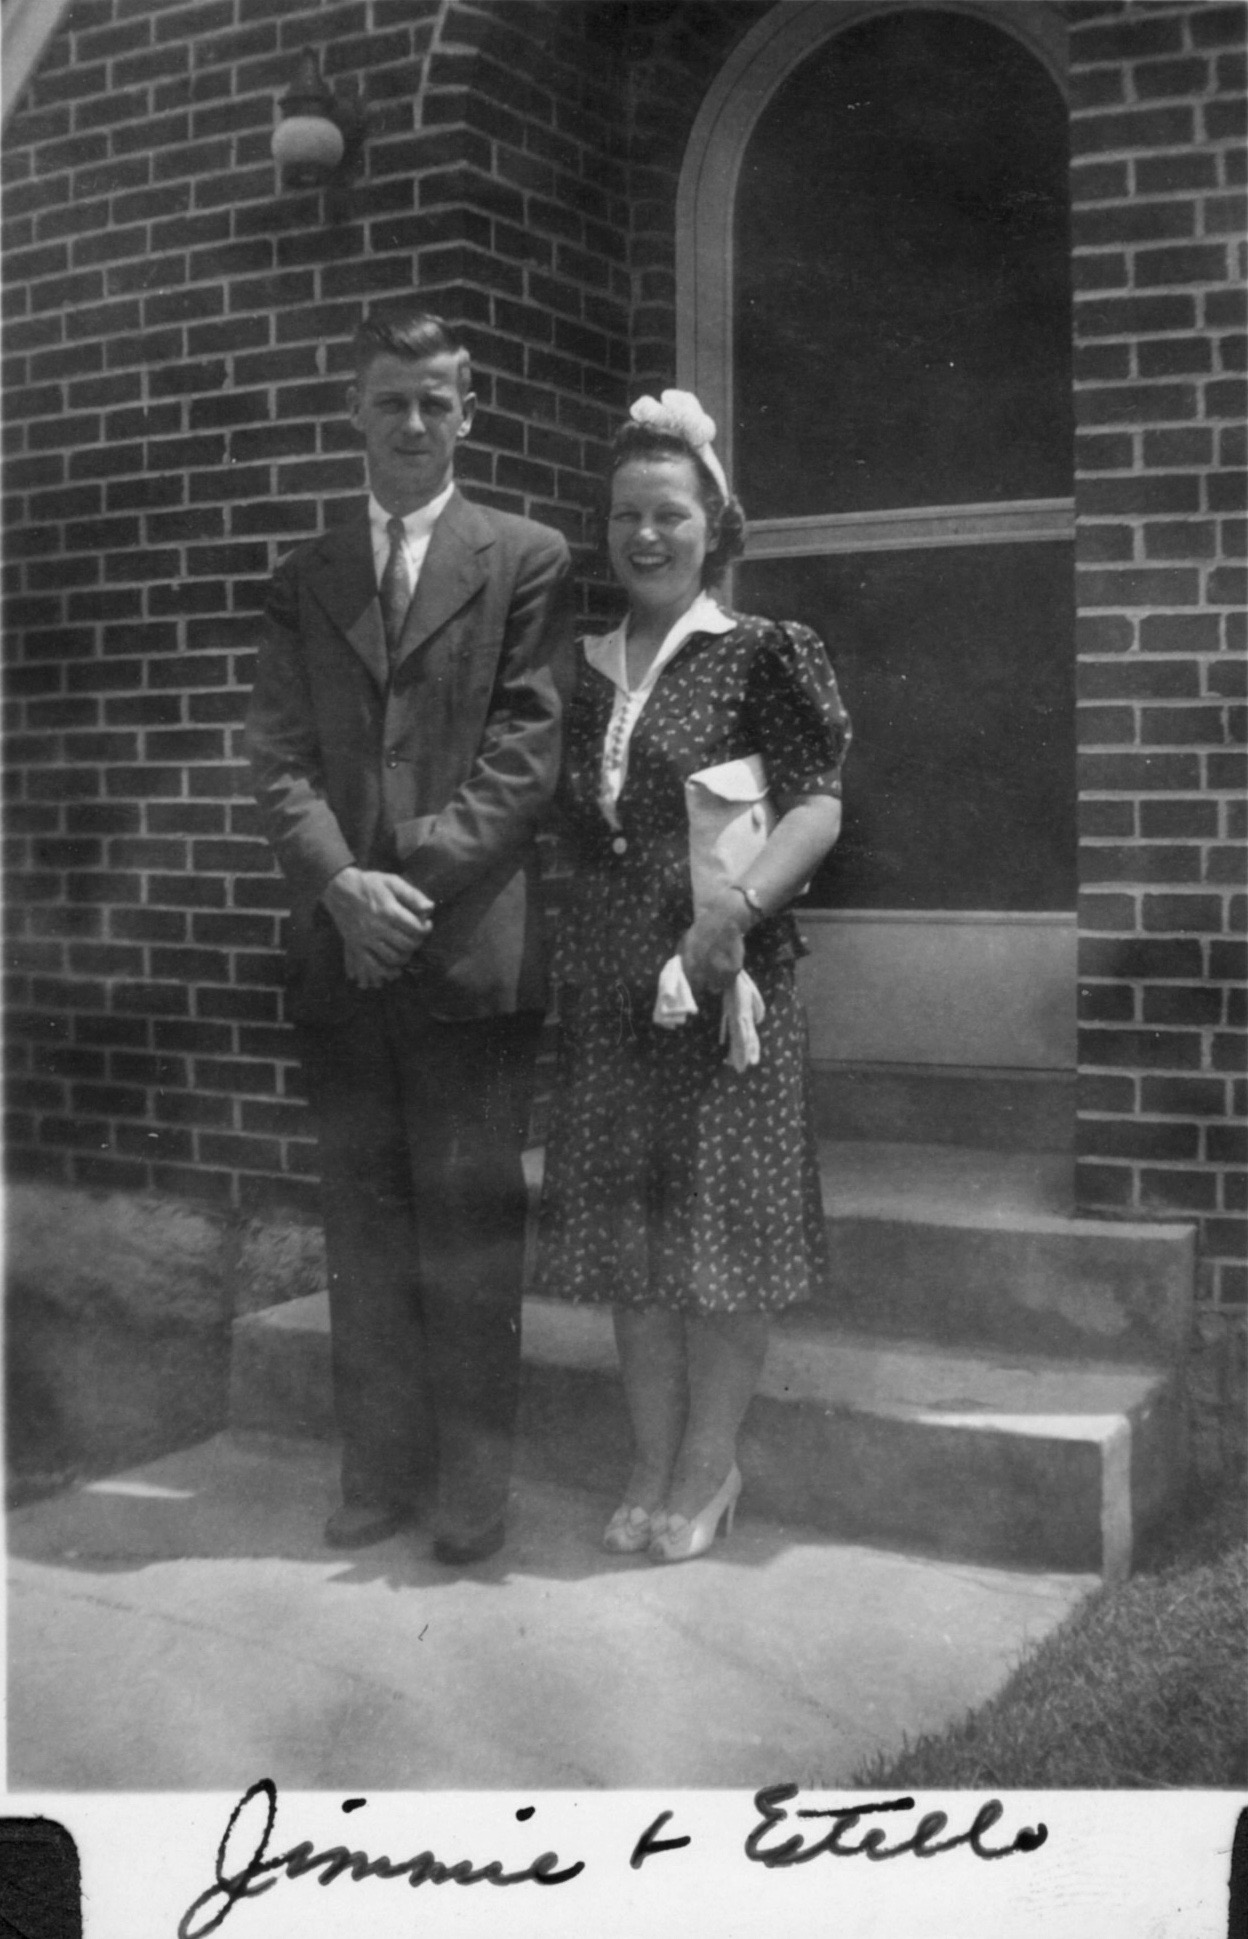 Early 1943, about a year after they bought the house on Castle Heights Avenue. The caption was written by my Aunt Bettye Kate, her sister. This is roughly about the time i was conceived. He would enlist in the Seabees in August.